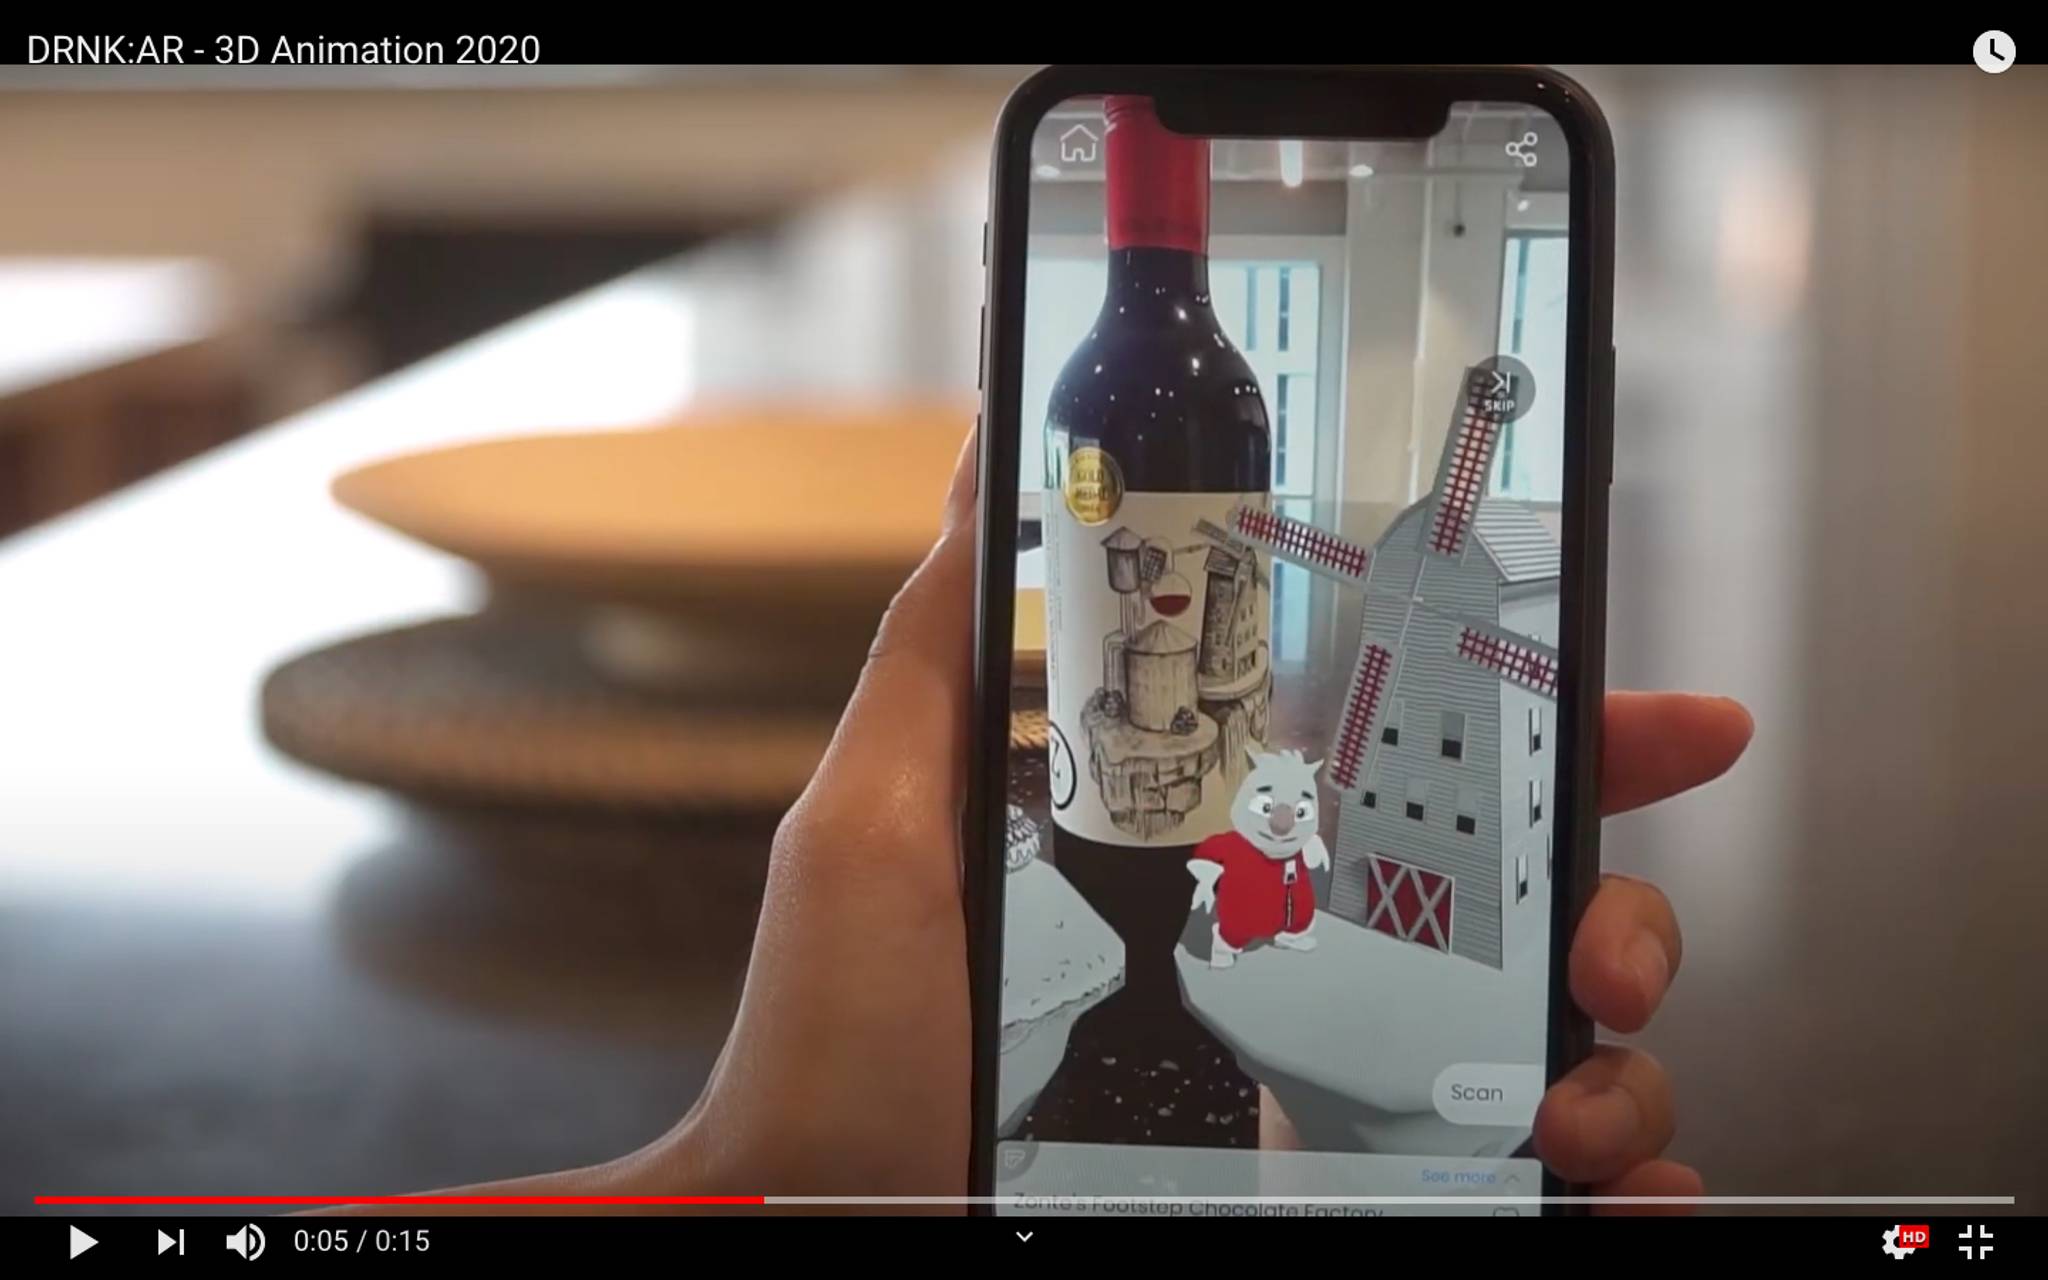 AR labels turn wine brand into interactive character